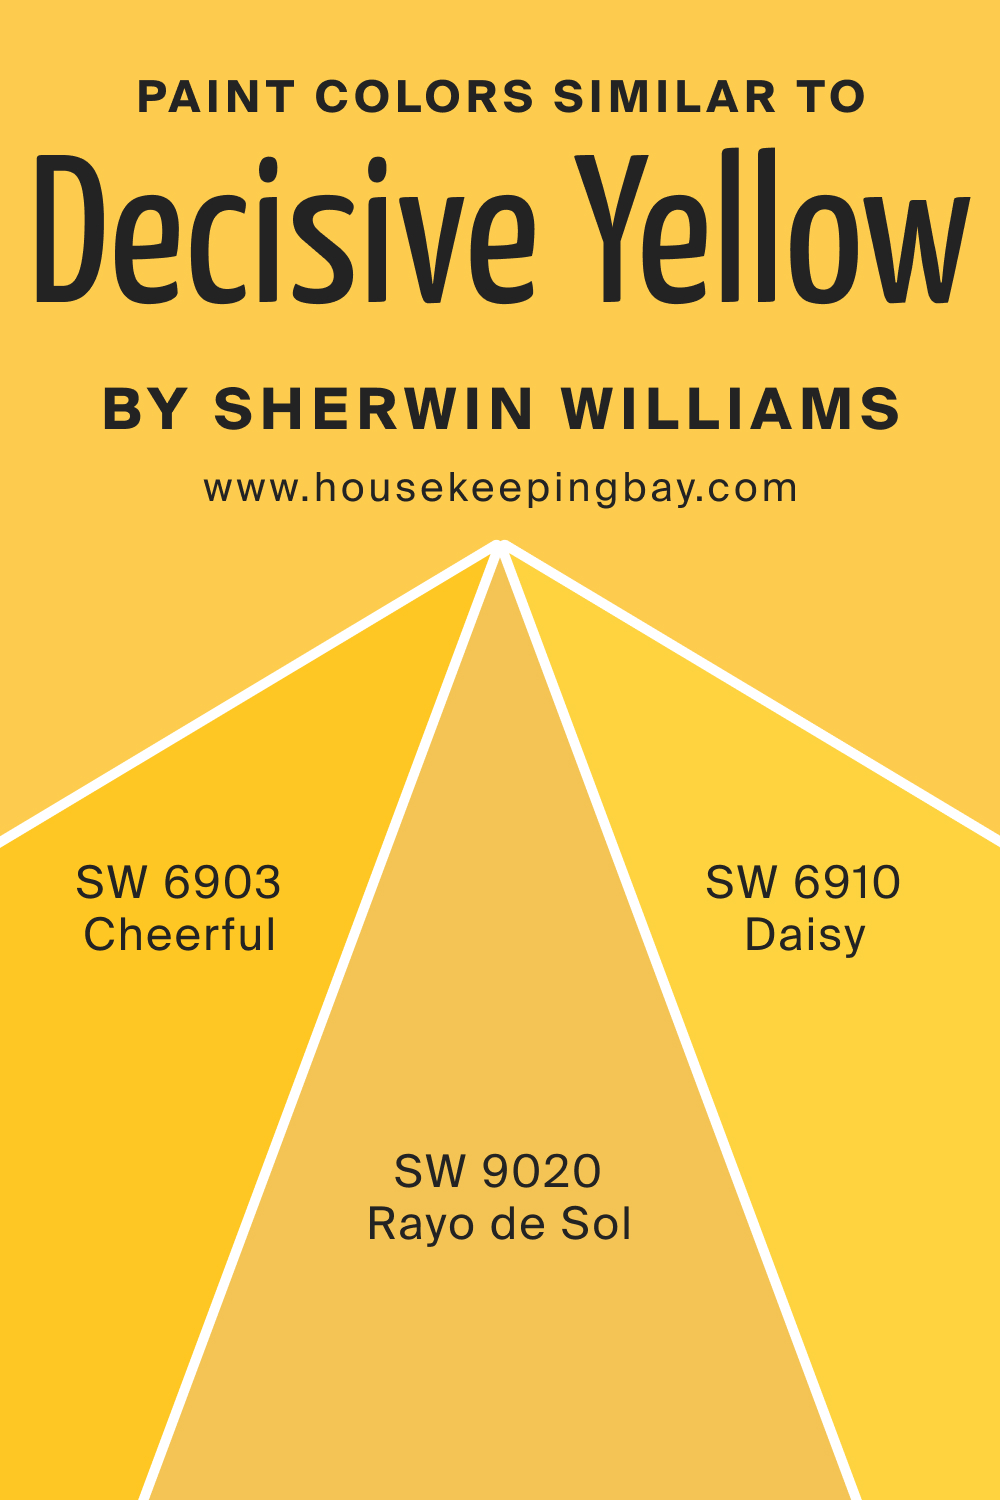 Paint Color Similar to Decisive Yellow SW 6902 by Sherwin Williams